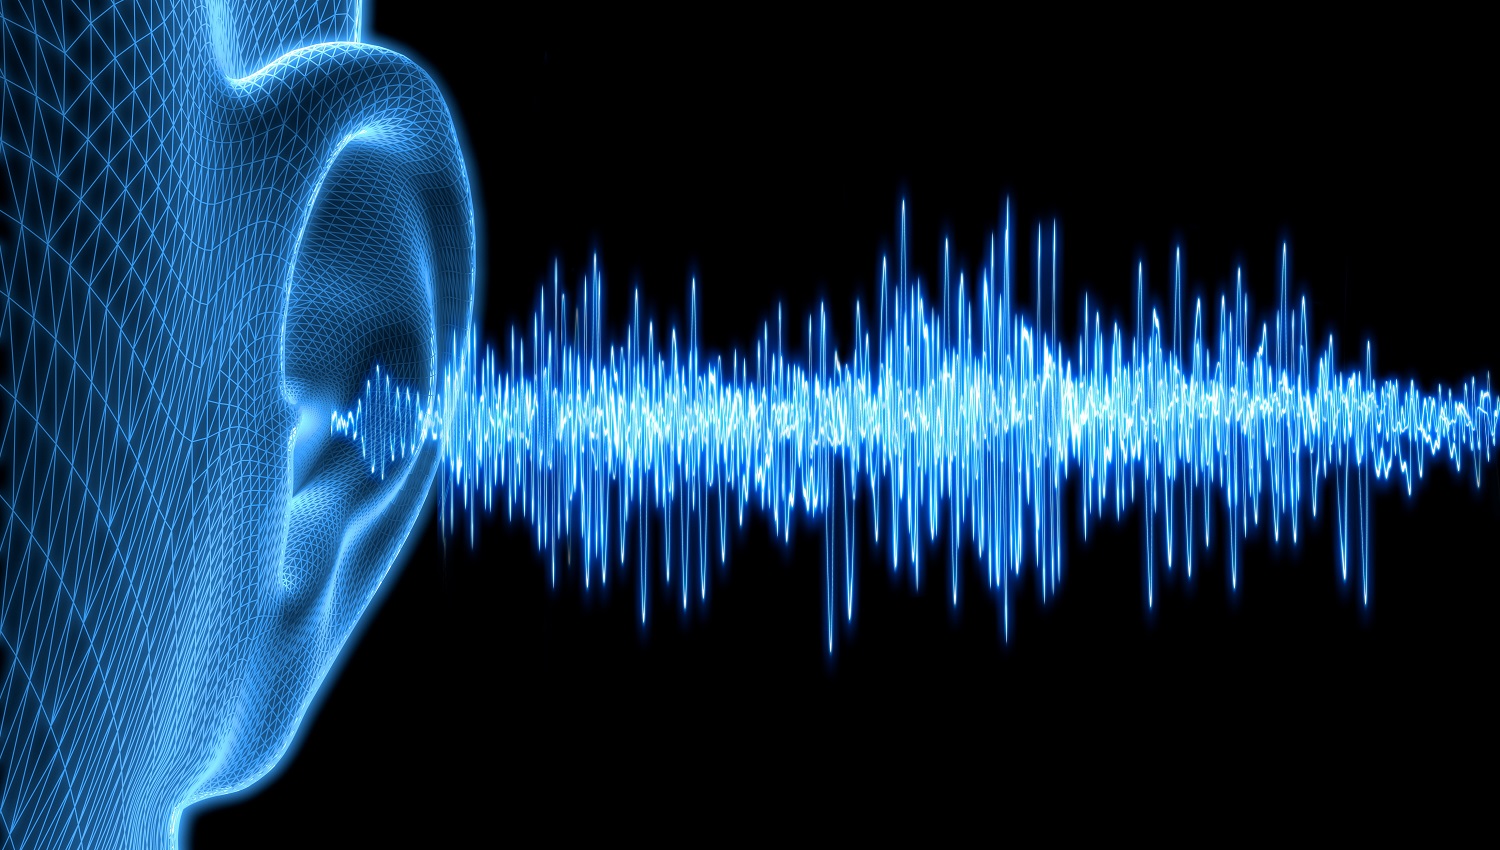 5 Clear Reasons Why Sound Is the Dominant Element in Early Warning